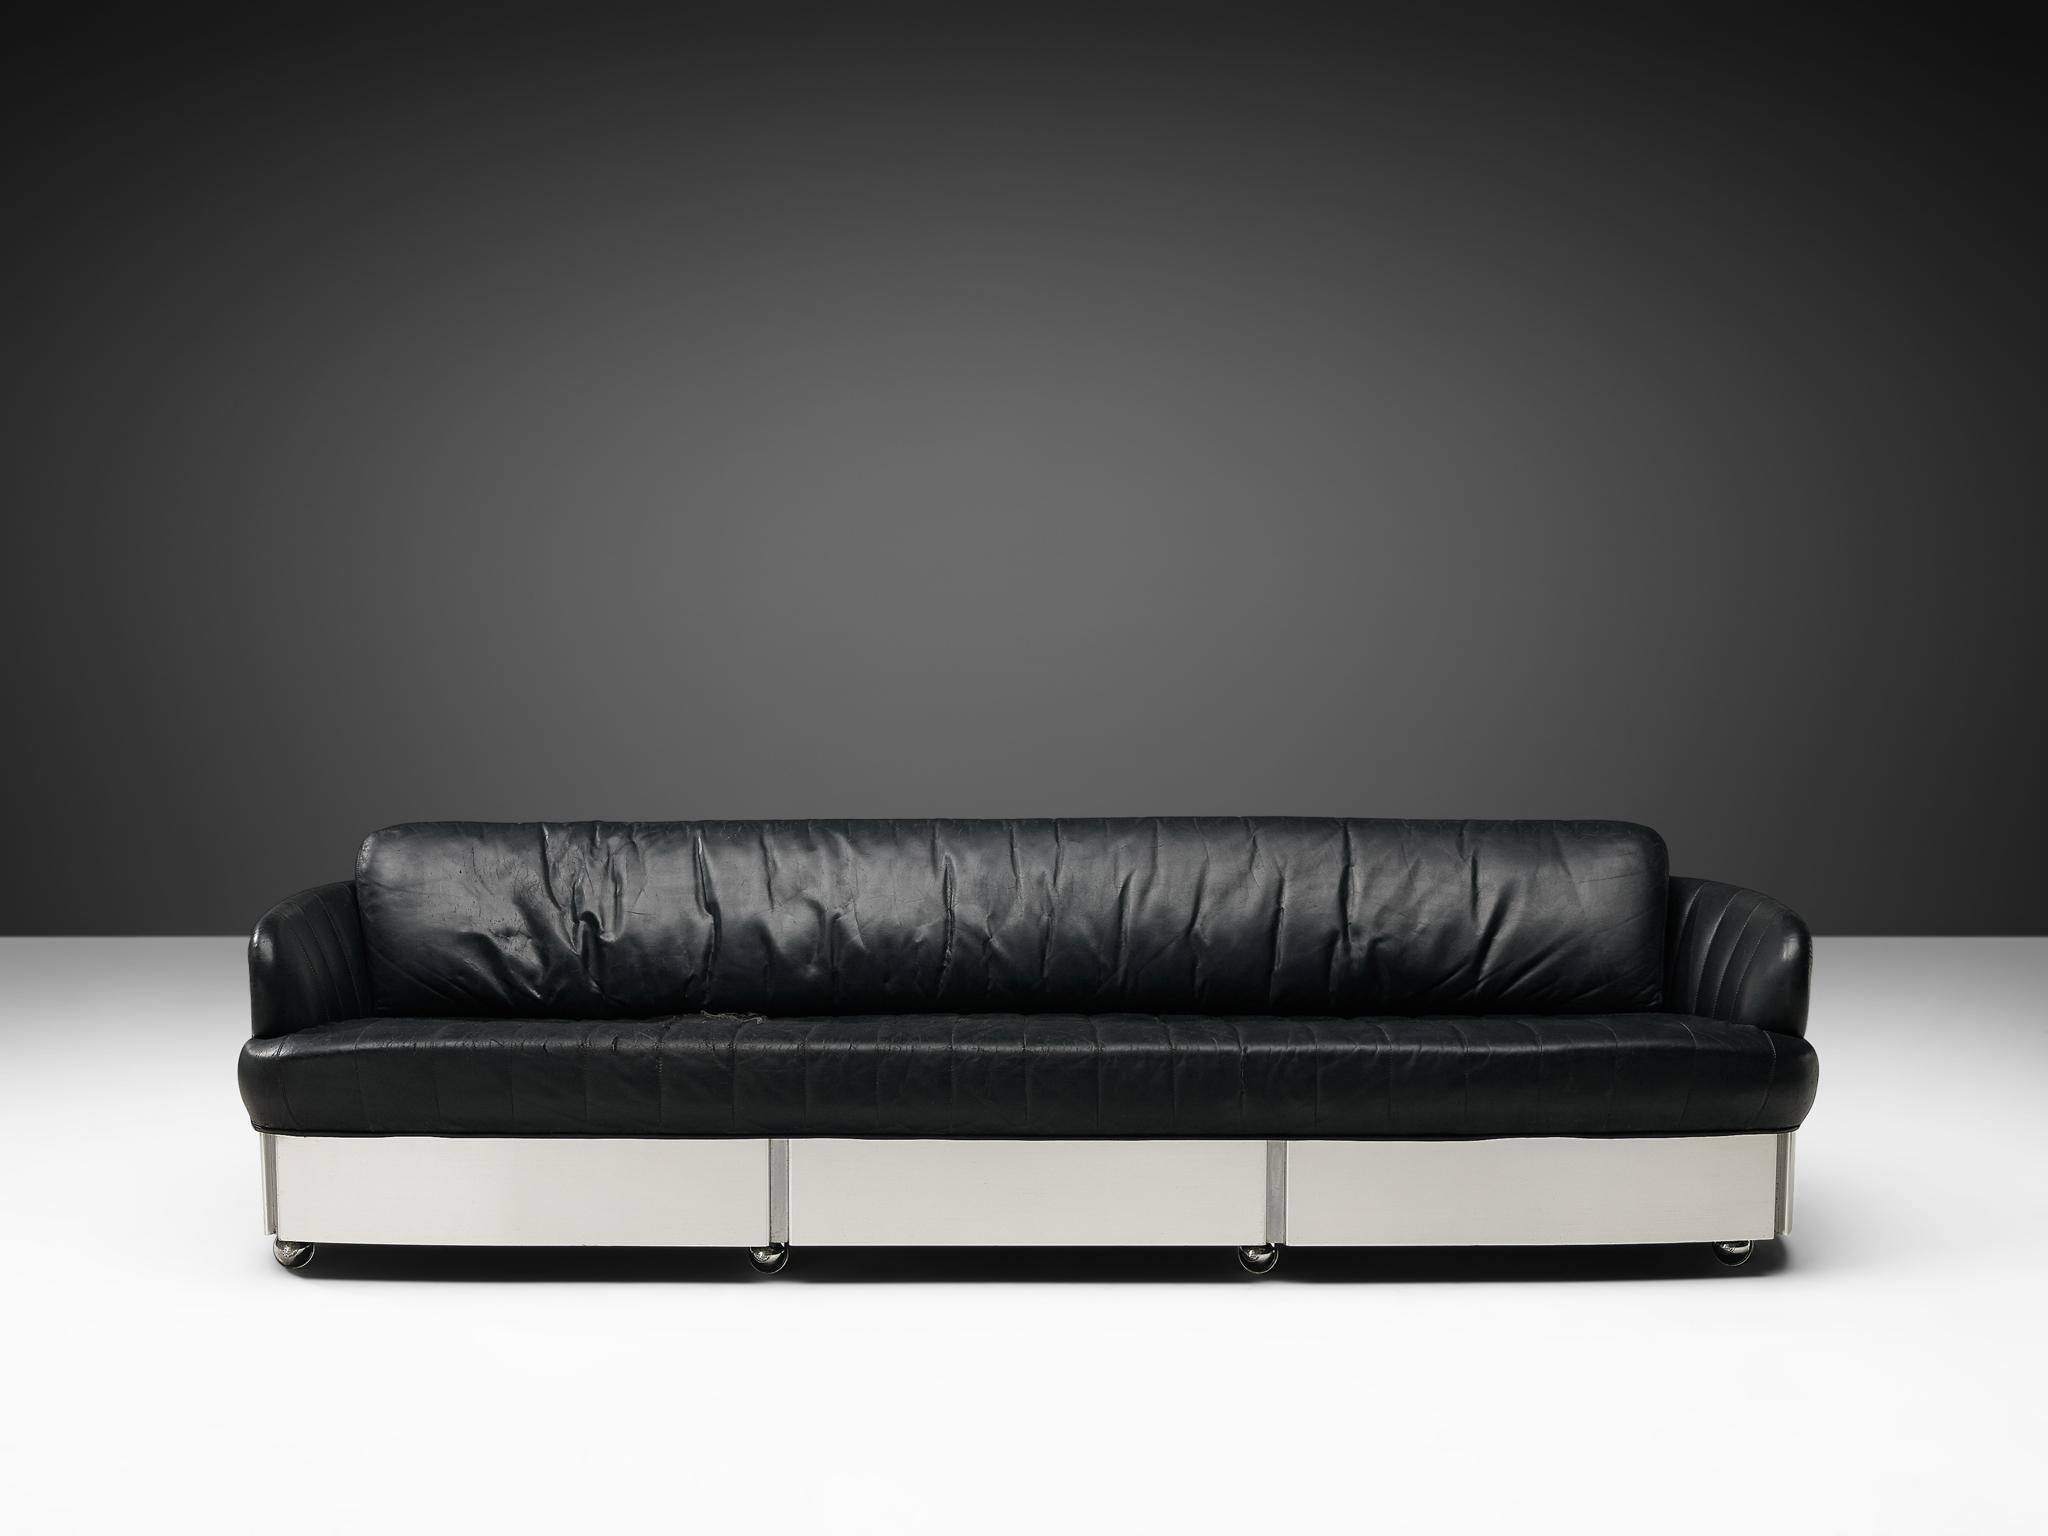 The large sofa features a brushed steel shell with thick, comfortable cushions inside. The black cushioning makes sure this sofa is highly comfortable. The brushed steel gives a slick finish to the couch. 

Please note that the item is in good, used